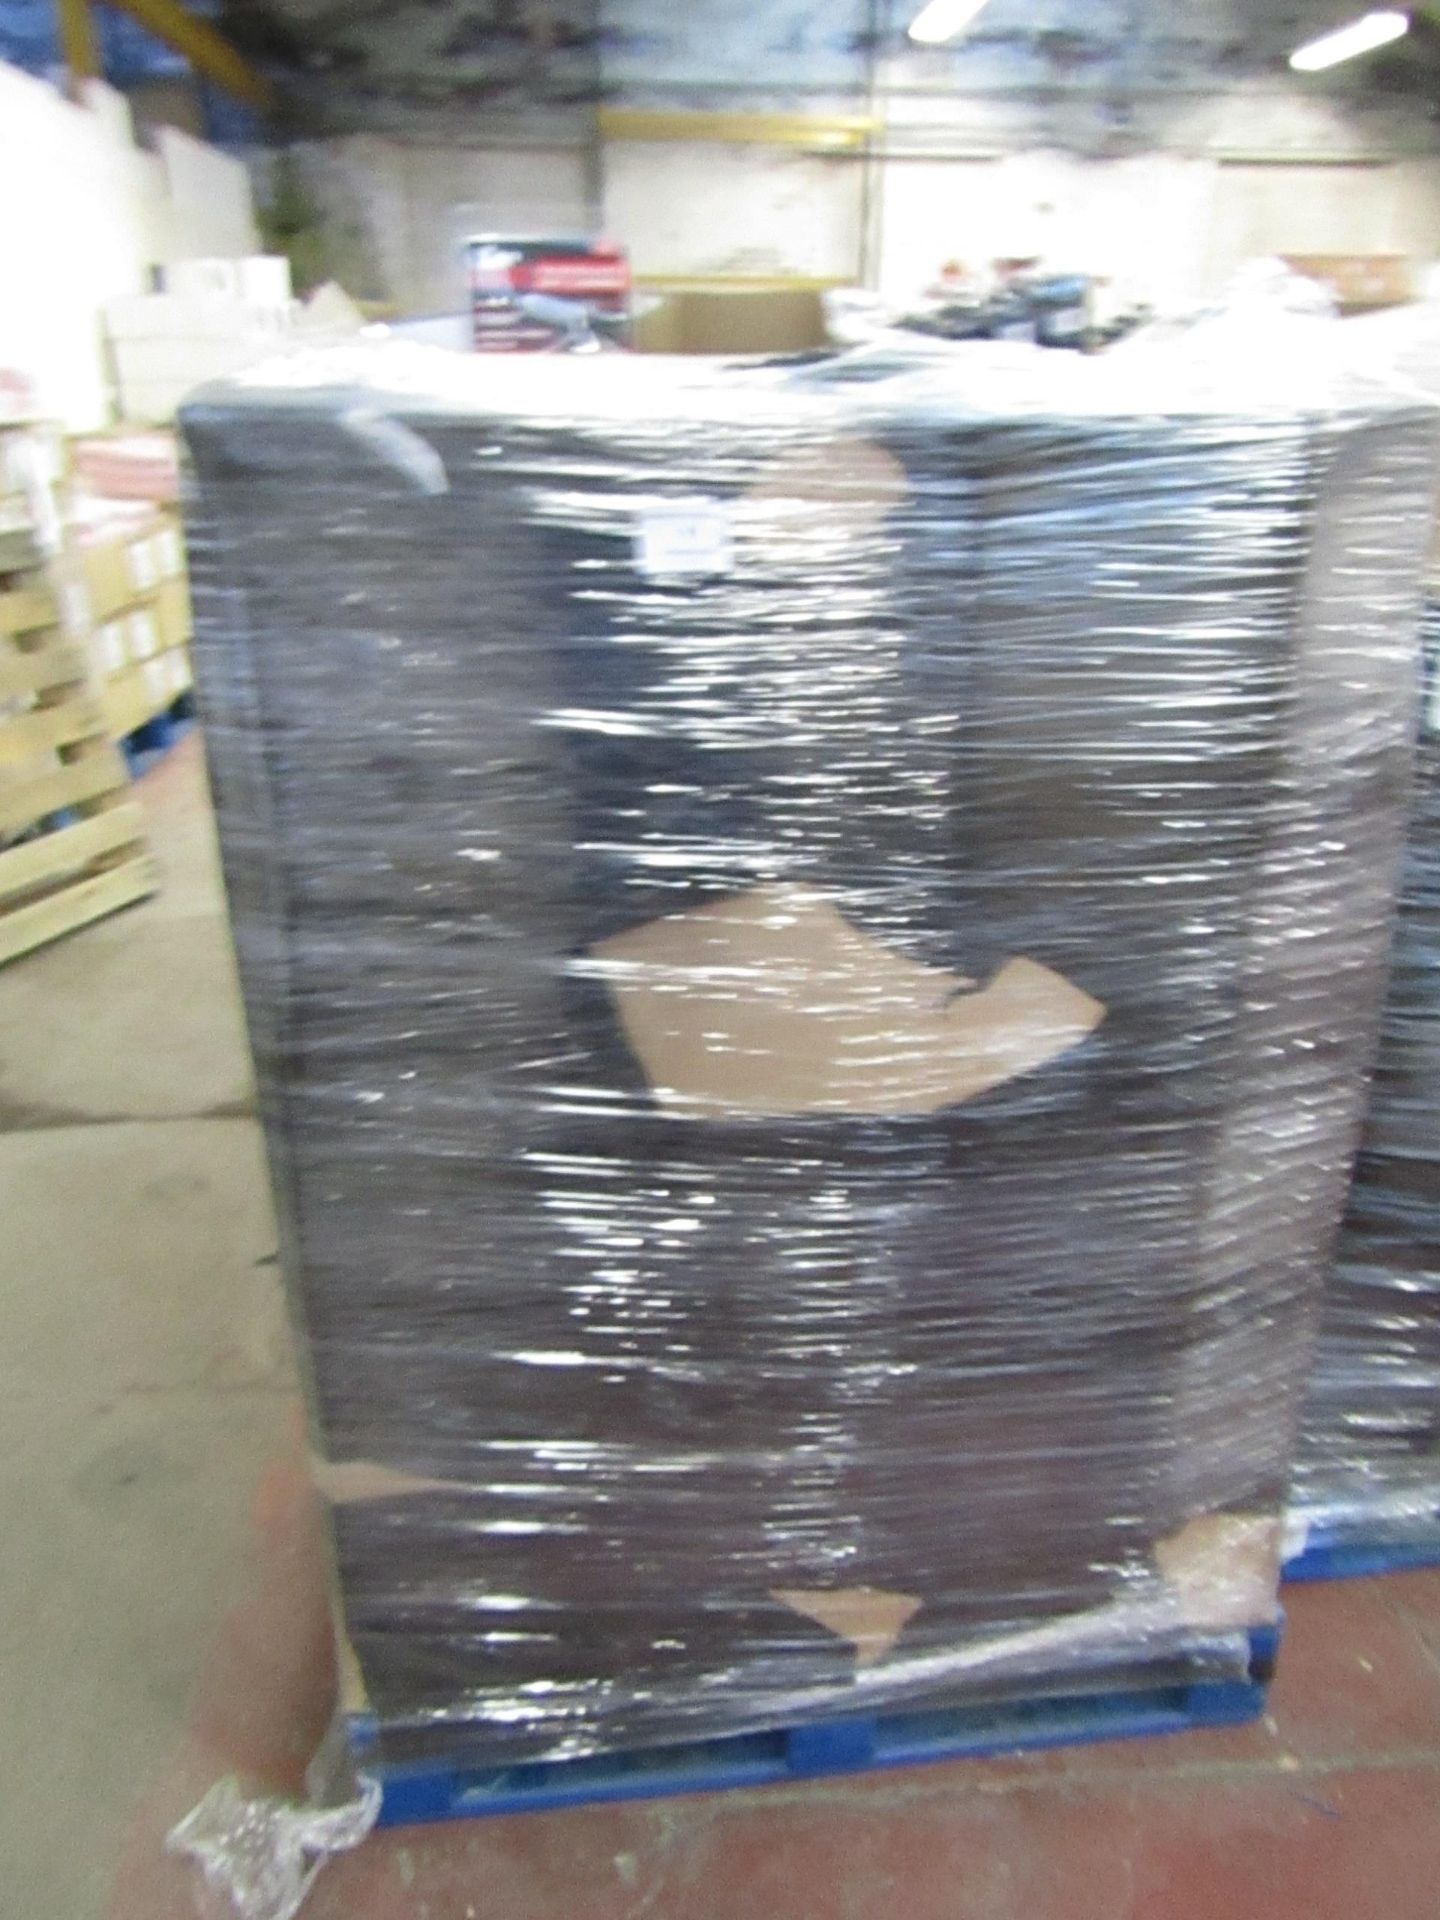 |APPROX 55X | THE PALLET CONTAINS NUTRI BULLETS, AIR HAWKS, AIR FRYER XL'S, RED COPPER CHEFS, X